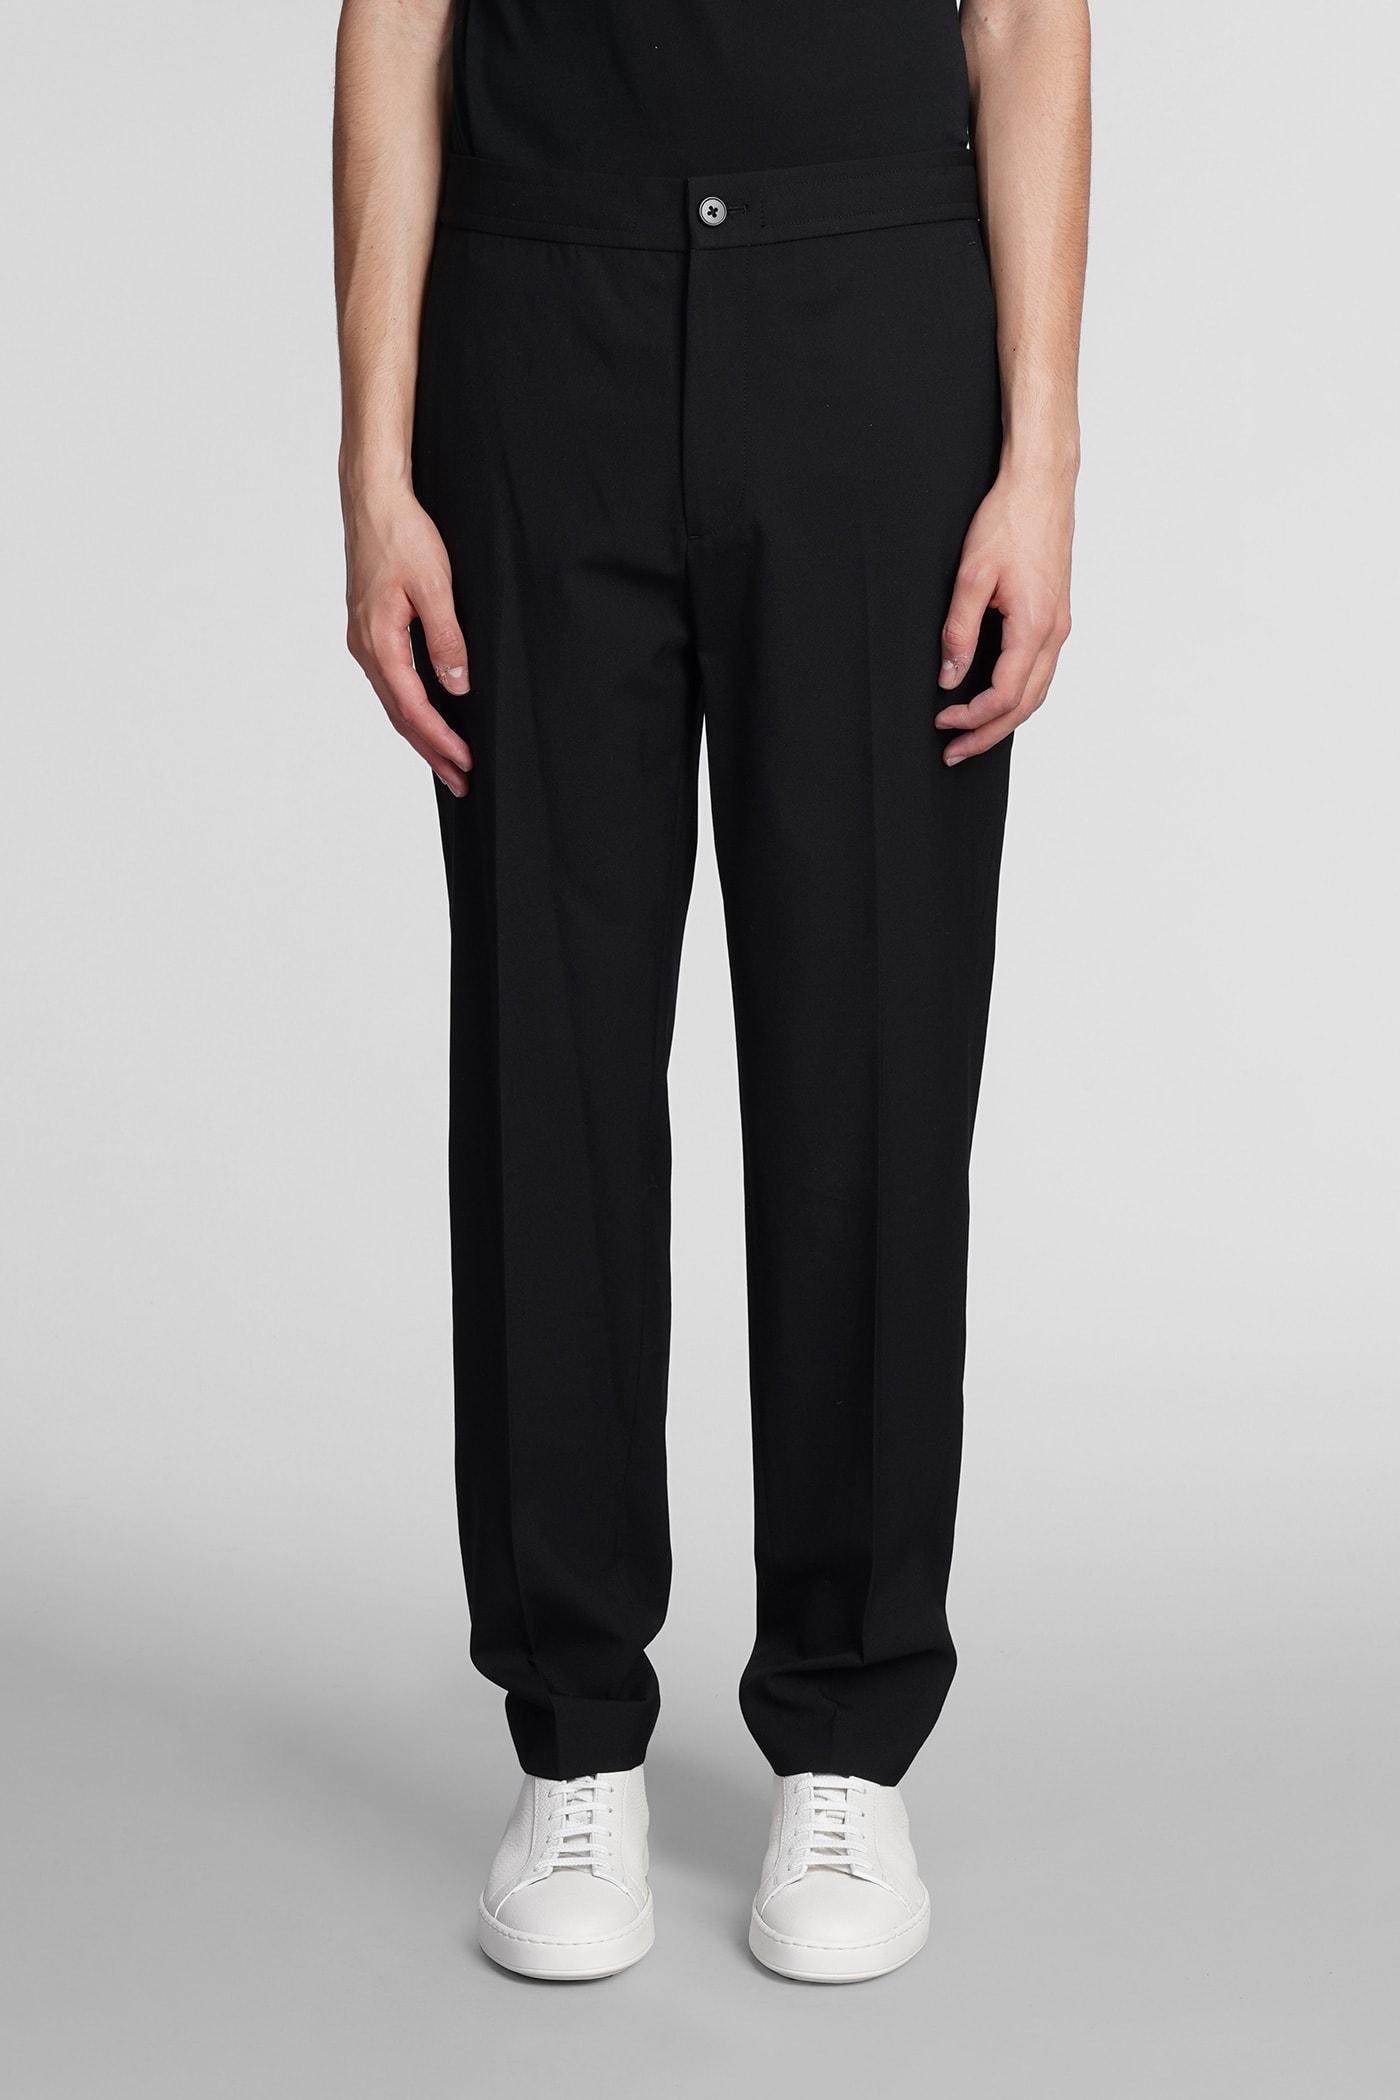 Theory Pants In Black Wool for Men | Lyst